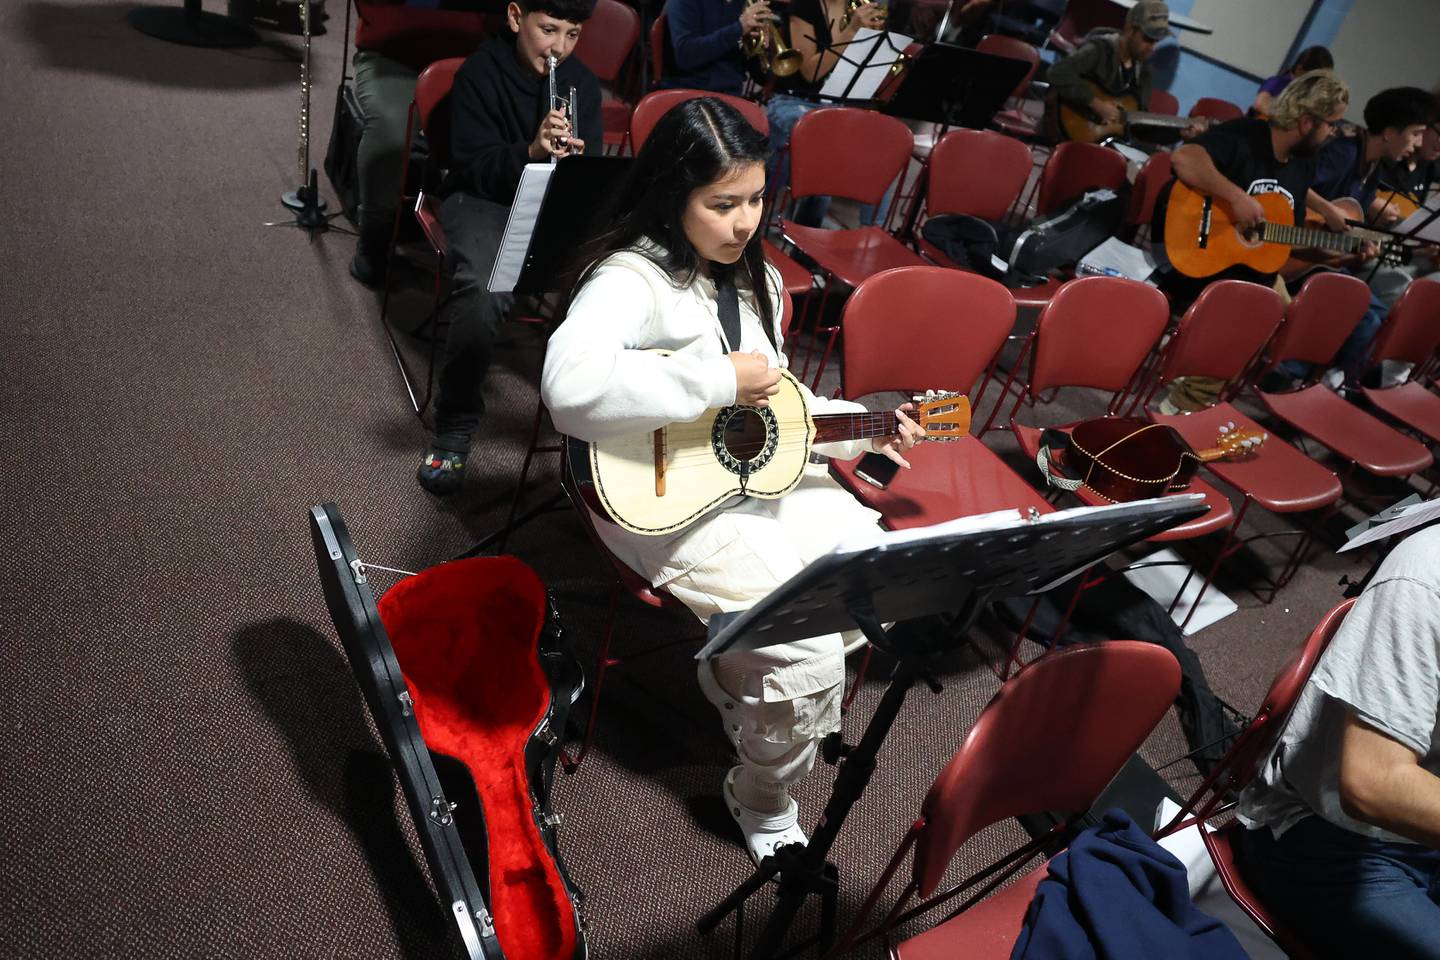 Marely Flores practices with Mariachi de Joliet, a community Mariachi band, for an upcoming fundraiser performance at the Rialto Square Theatre in Joliet.